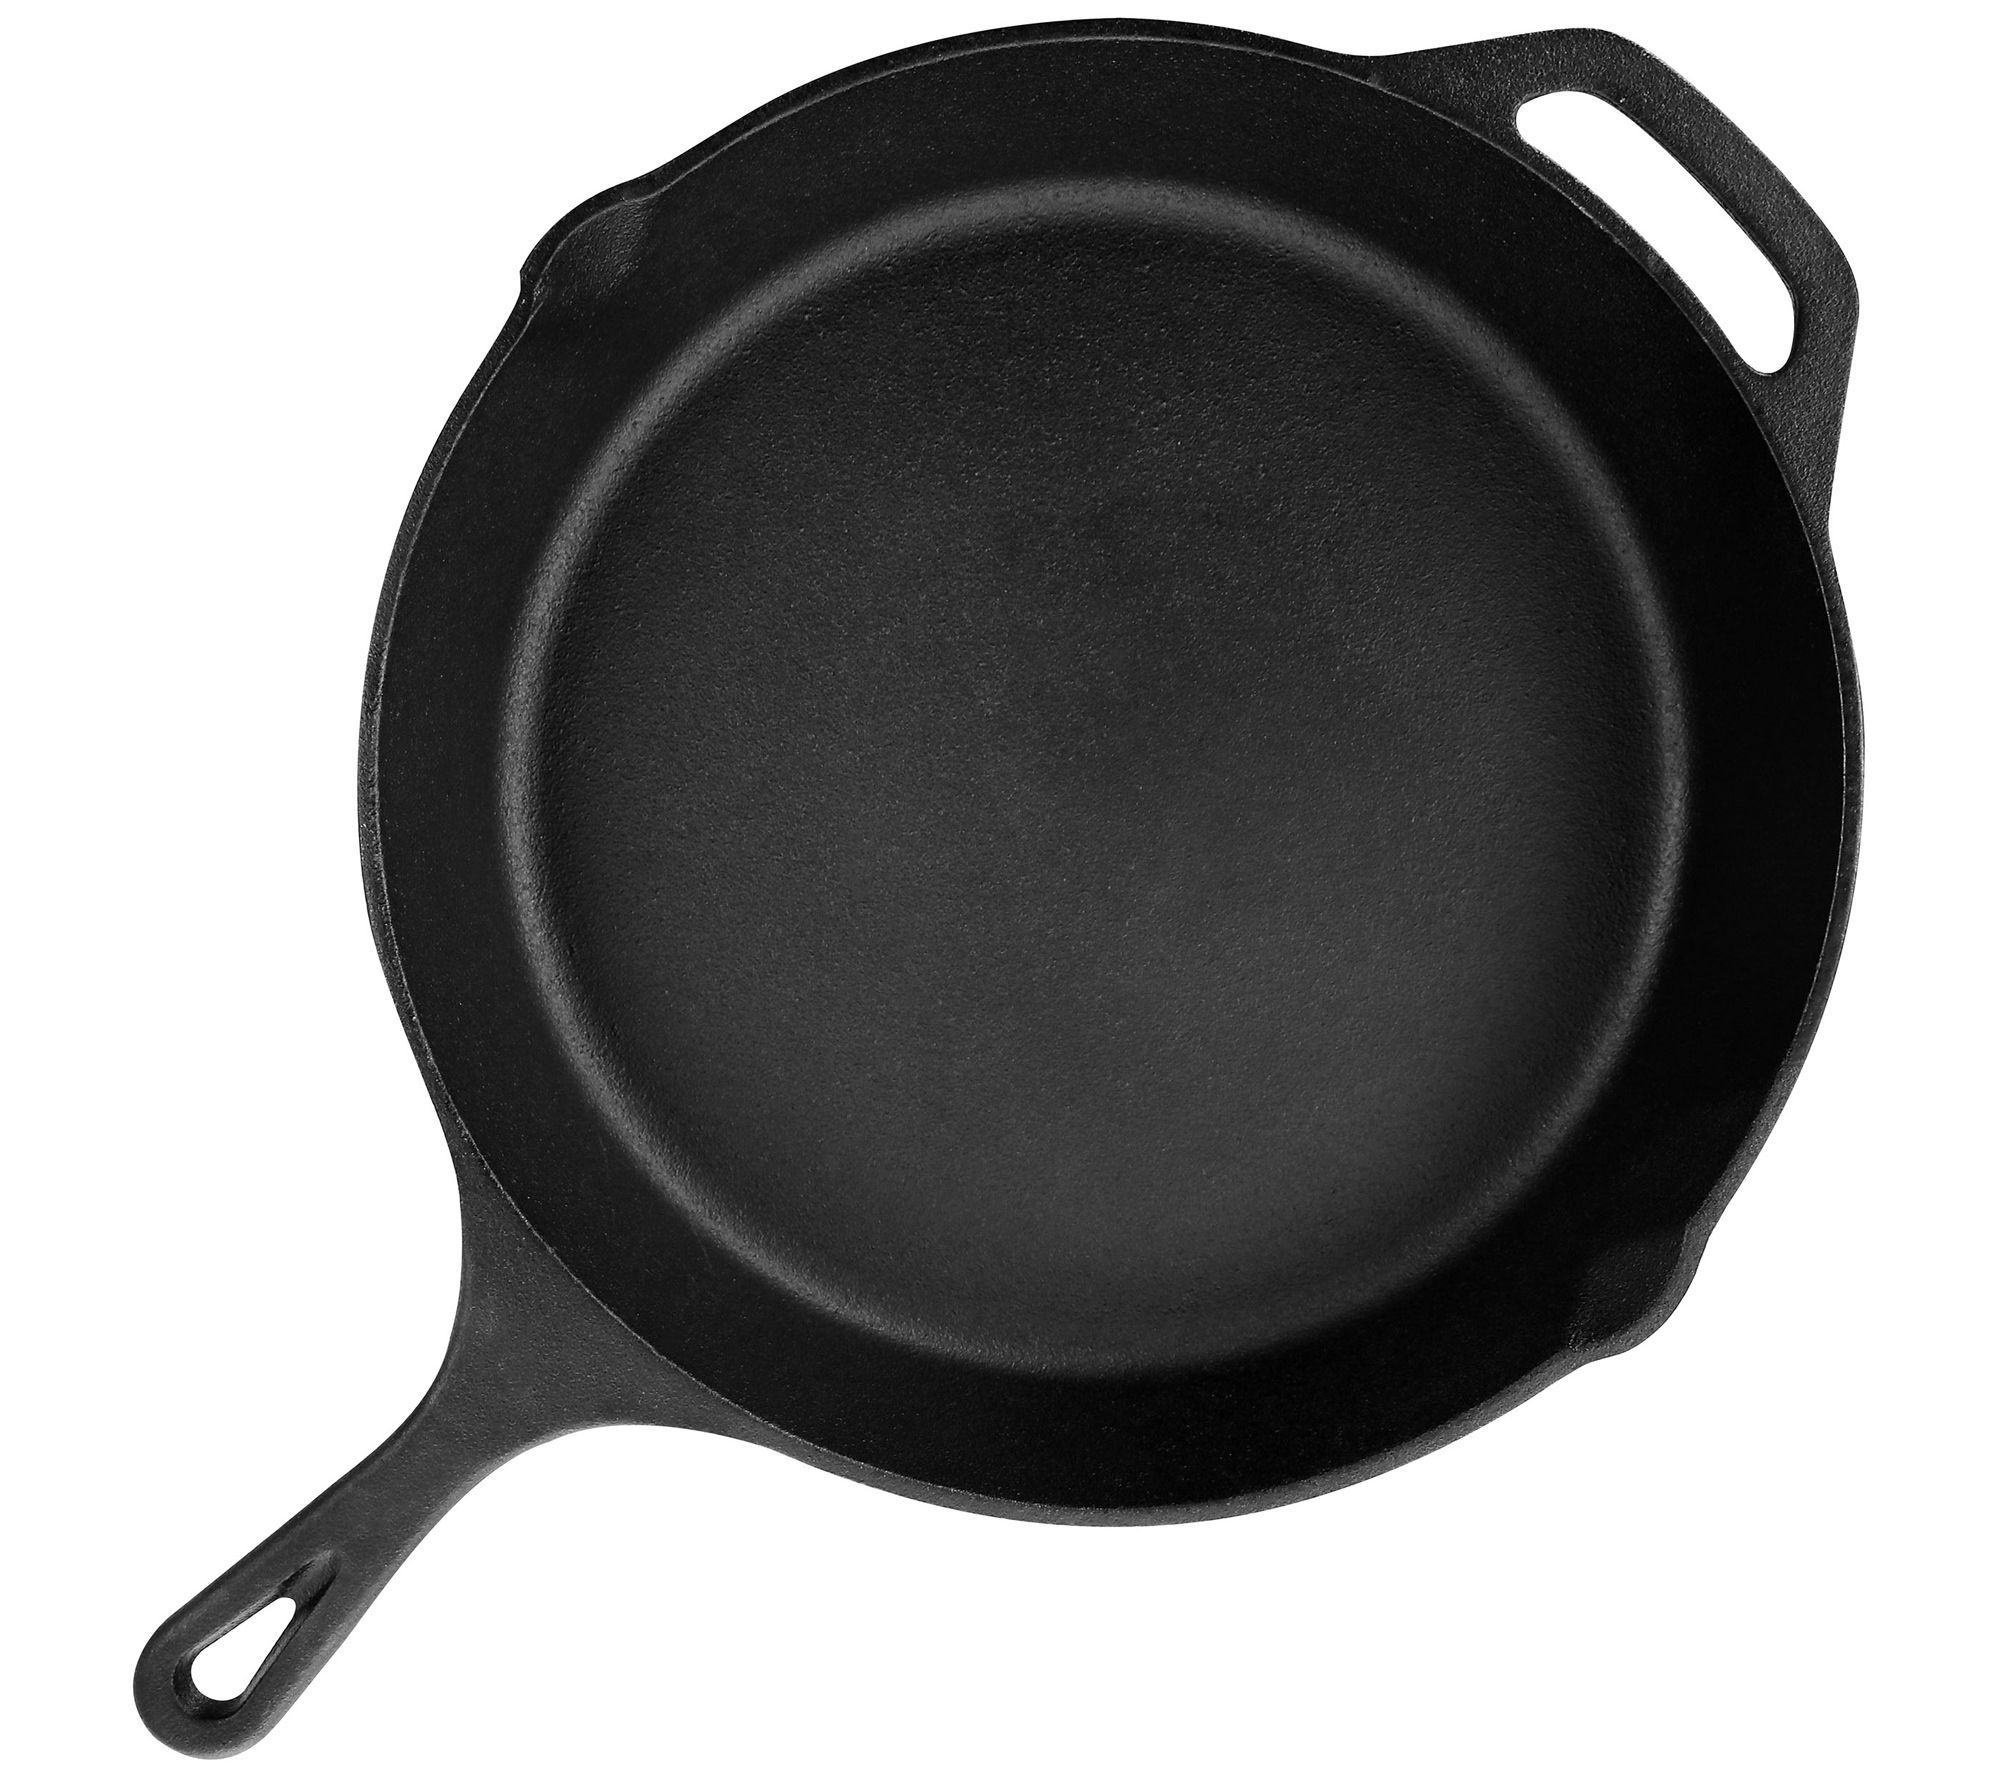 MegaChef 10 Inch Round Preseasoned Cast Iron Frying Pan with Handle in  Black - 10 Inch